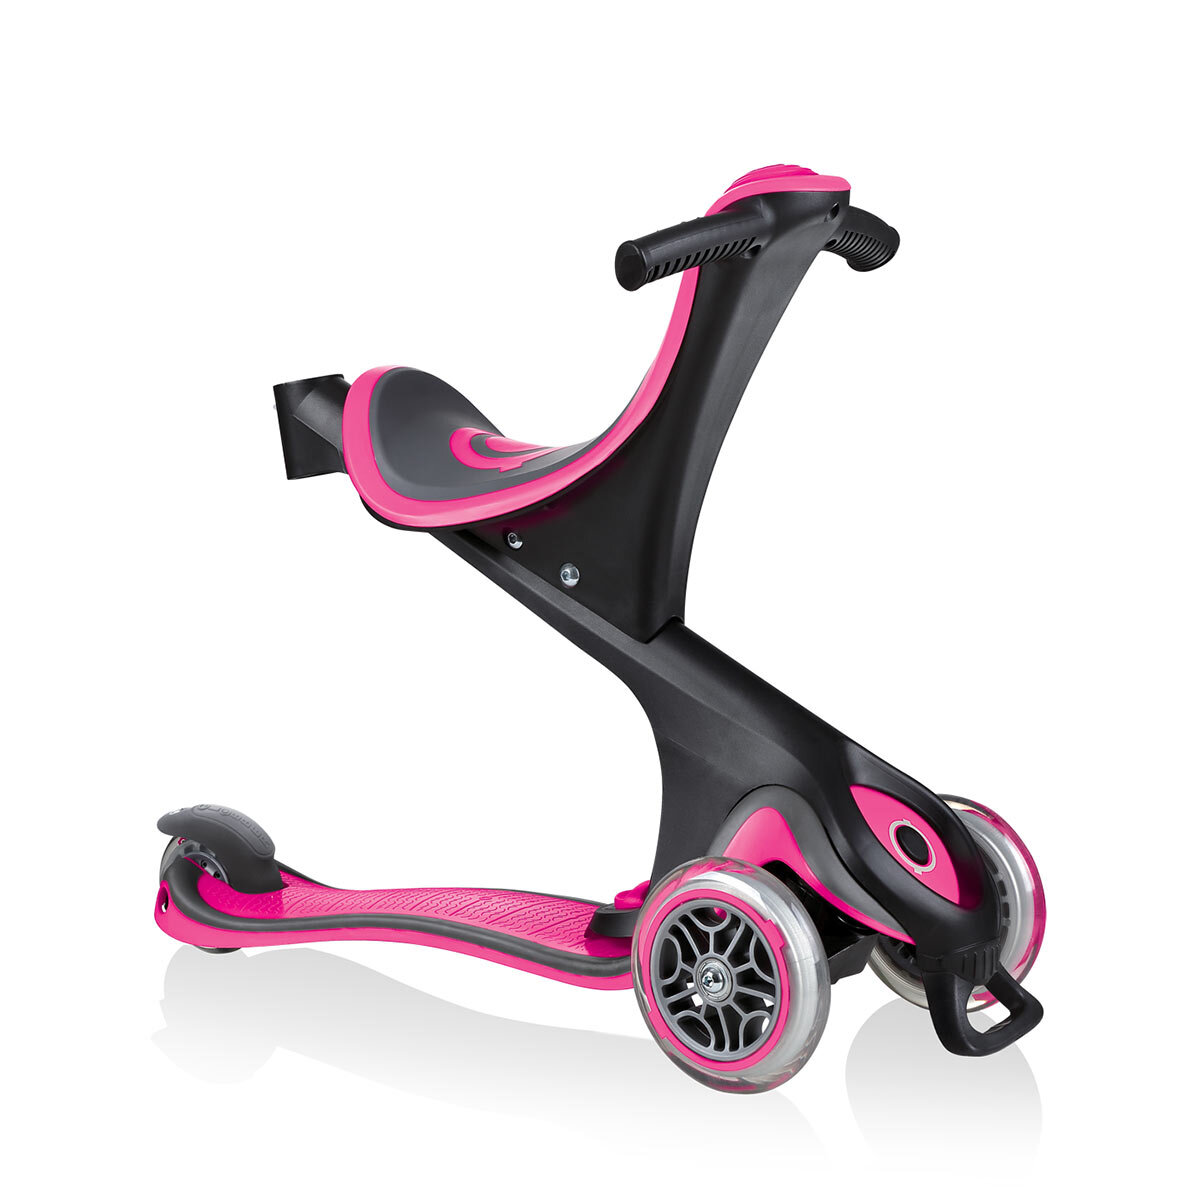 Buy Globber Go Up Comfort Scooter in Pink Step 2 Image at Costco.co.uk